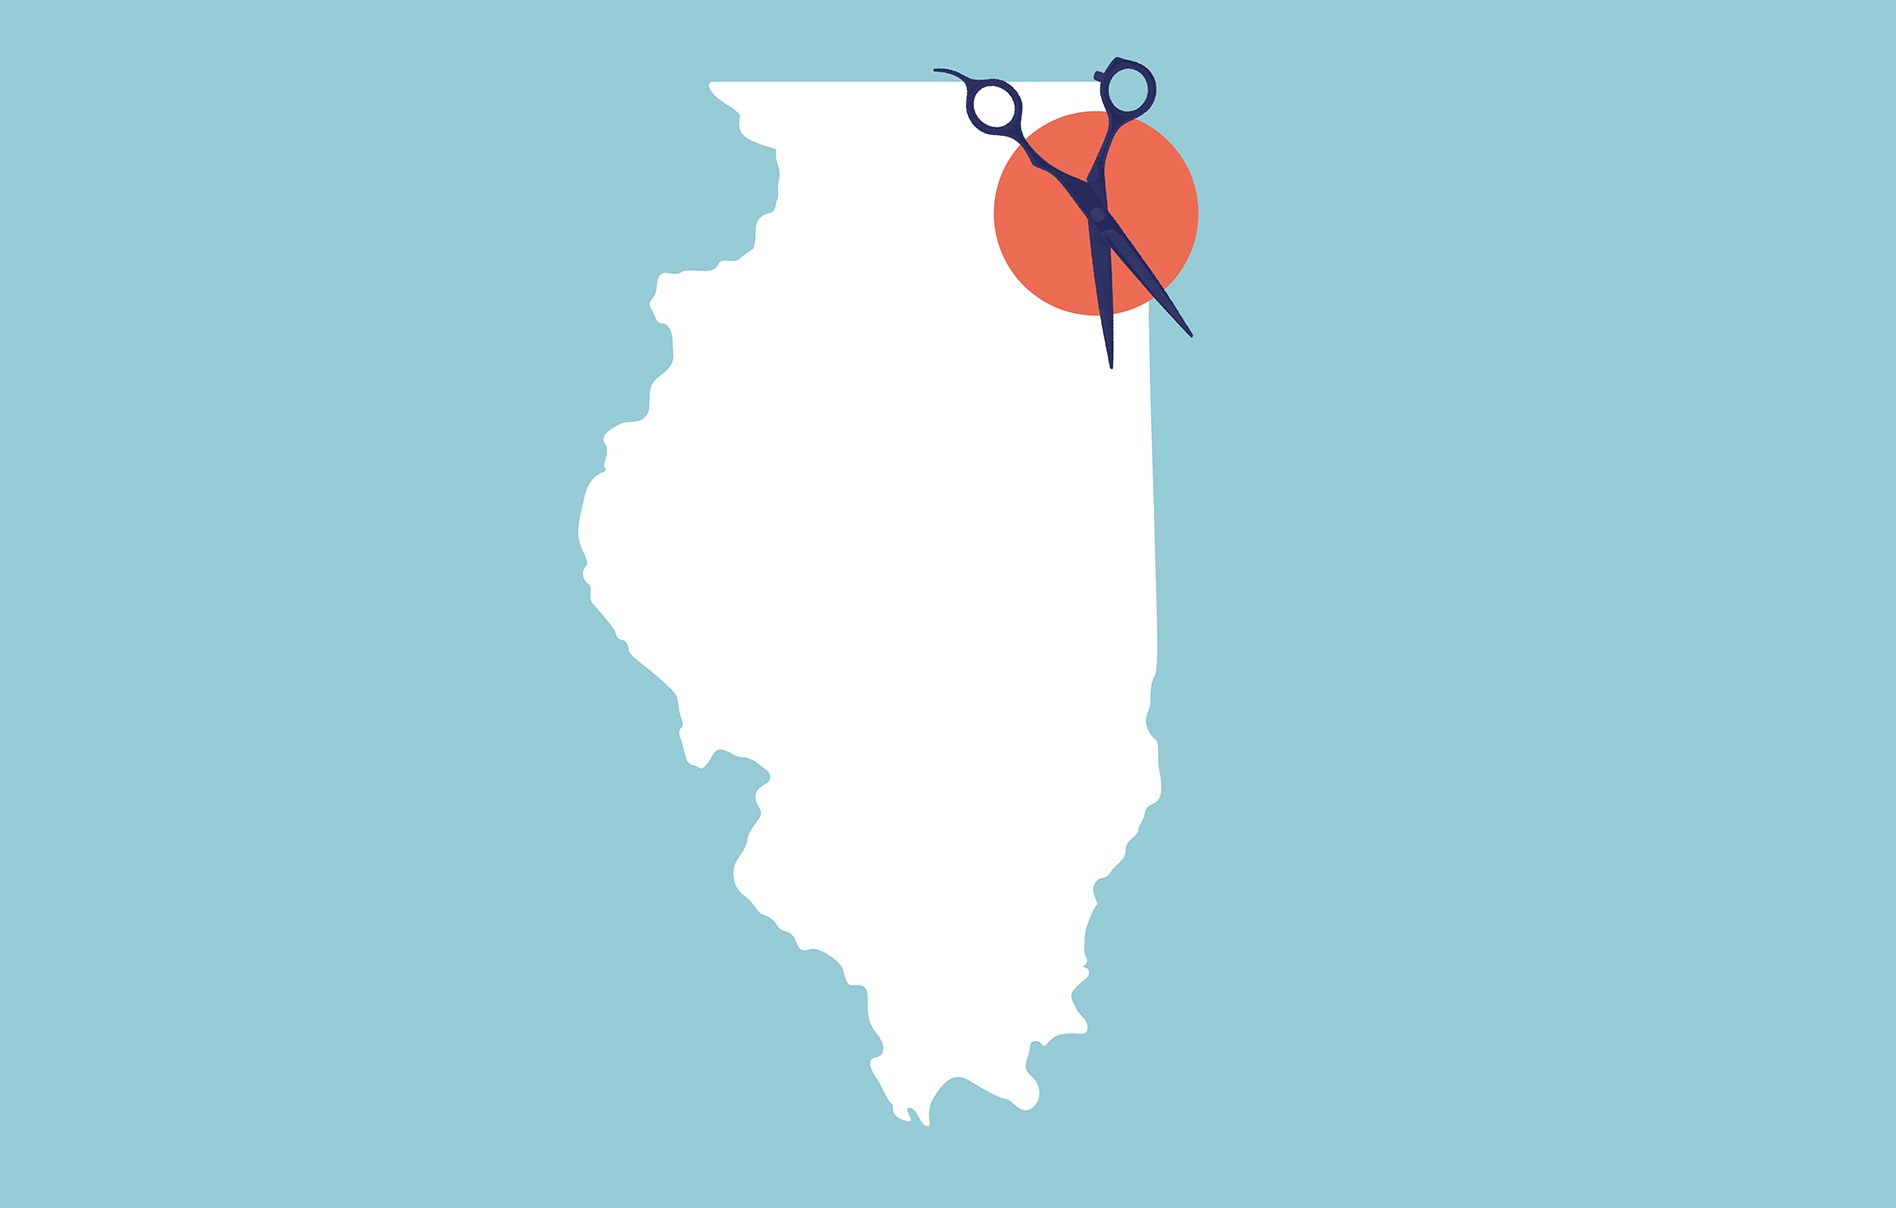 An outline of Illinois with Chicago highlighted with a circle and a pair of hair scissors